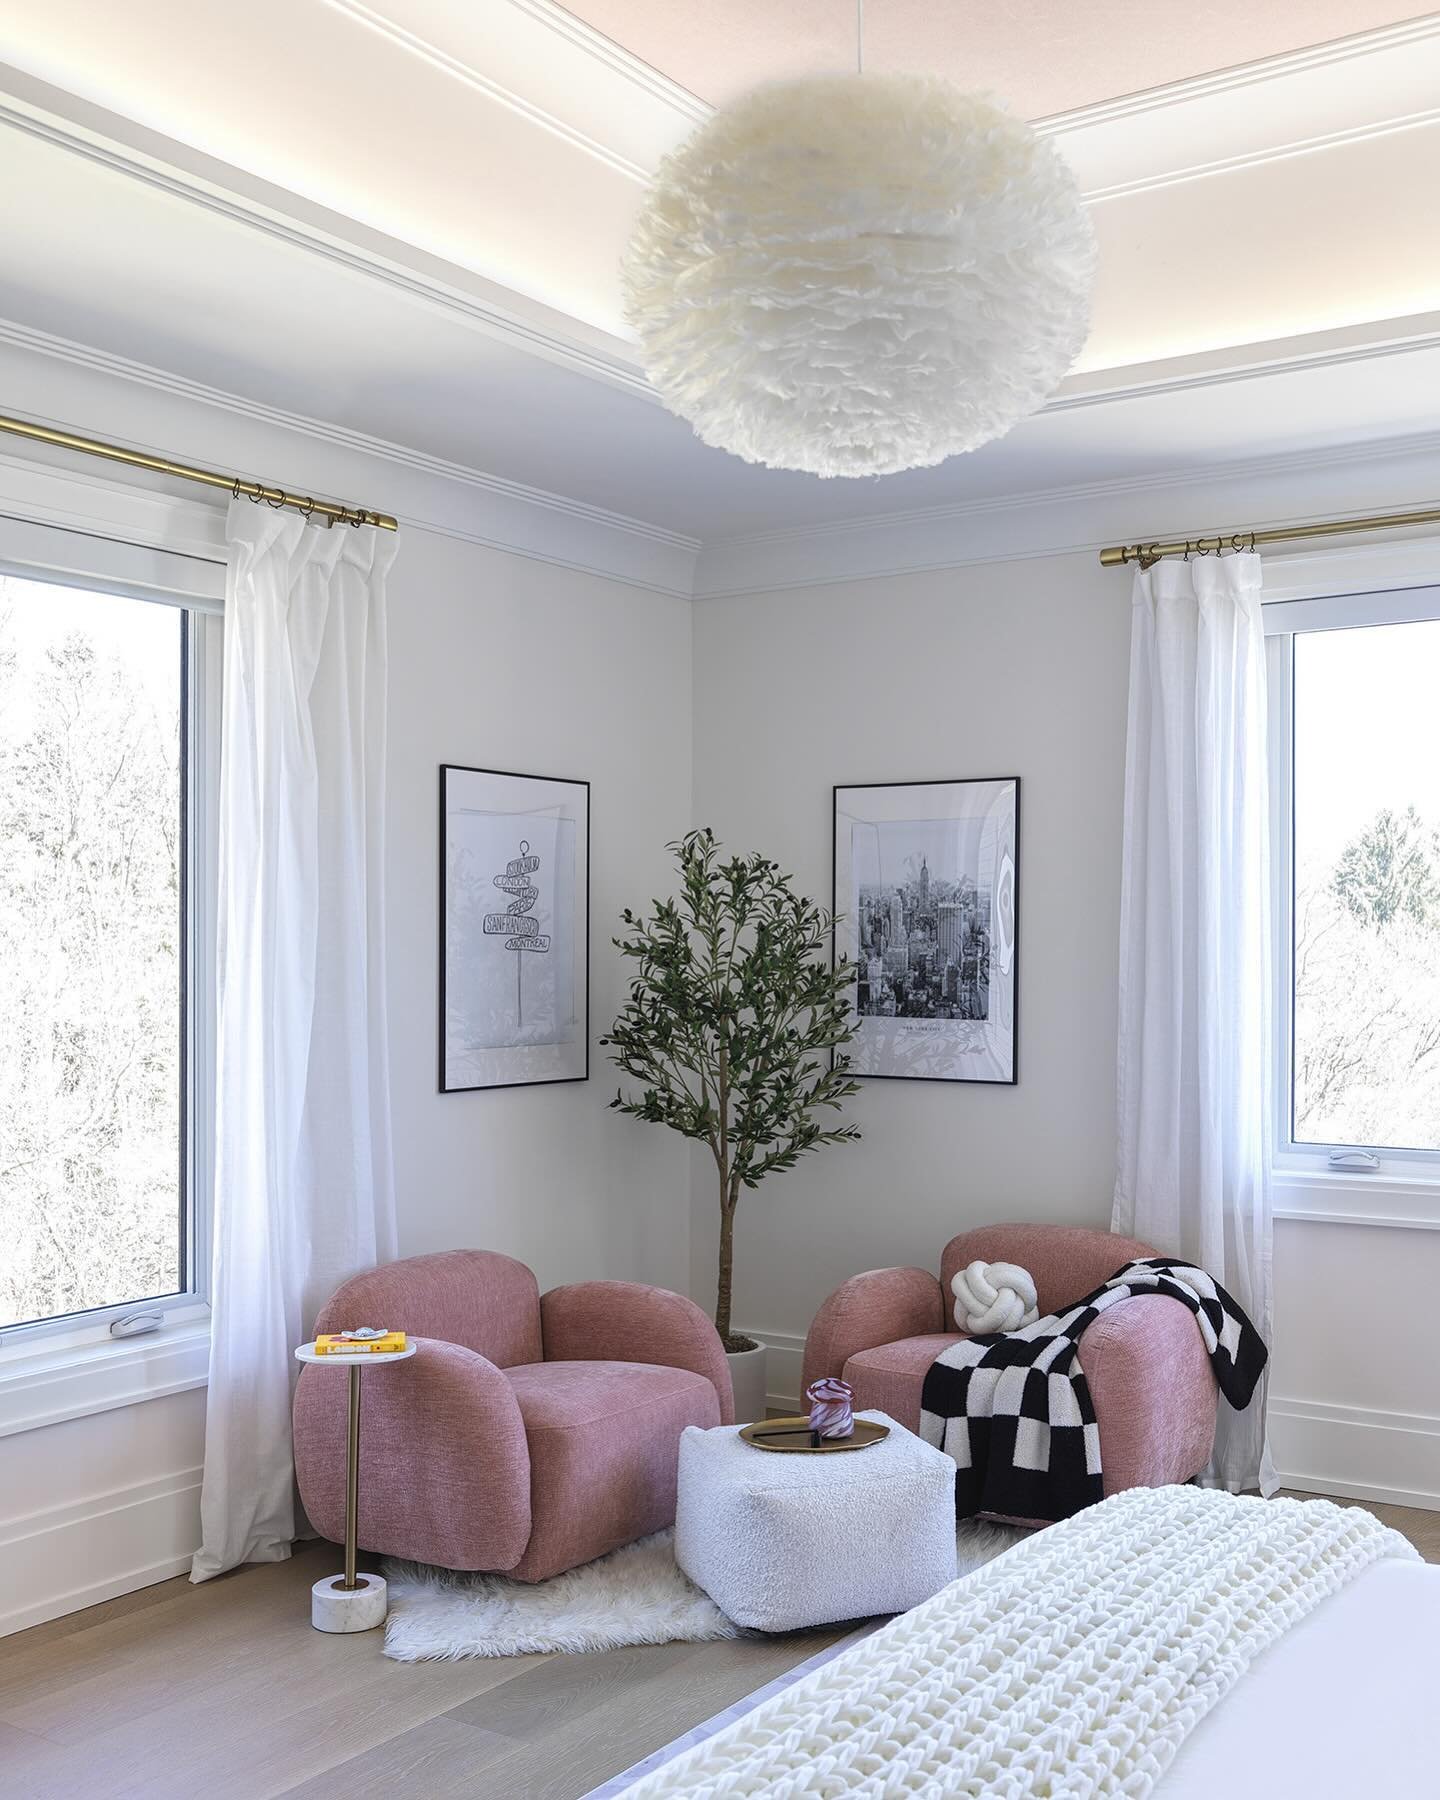 My client surprised her daughter with a bedroom makeover when she returned from University!
Sneak peek of the cozy corner seating area! 

📸 @arnalphotography 

#bedroommakeover #interiordesign #surprisemakeover #design #bedroom 
#loveyourspace